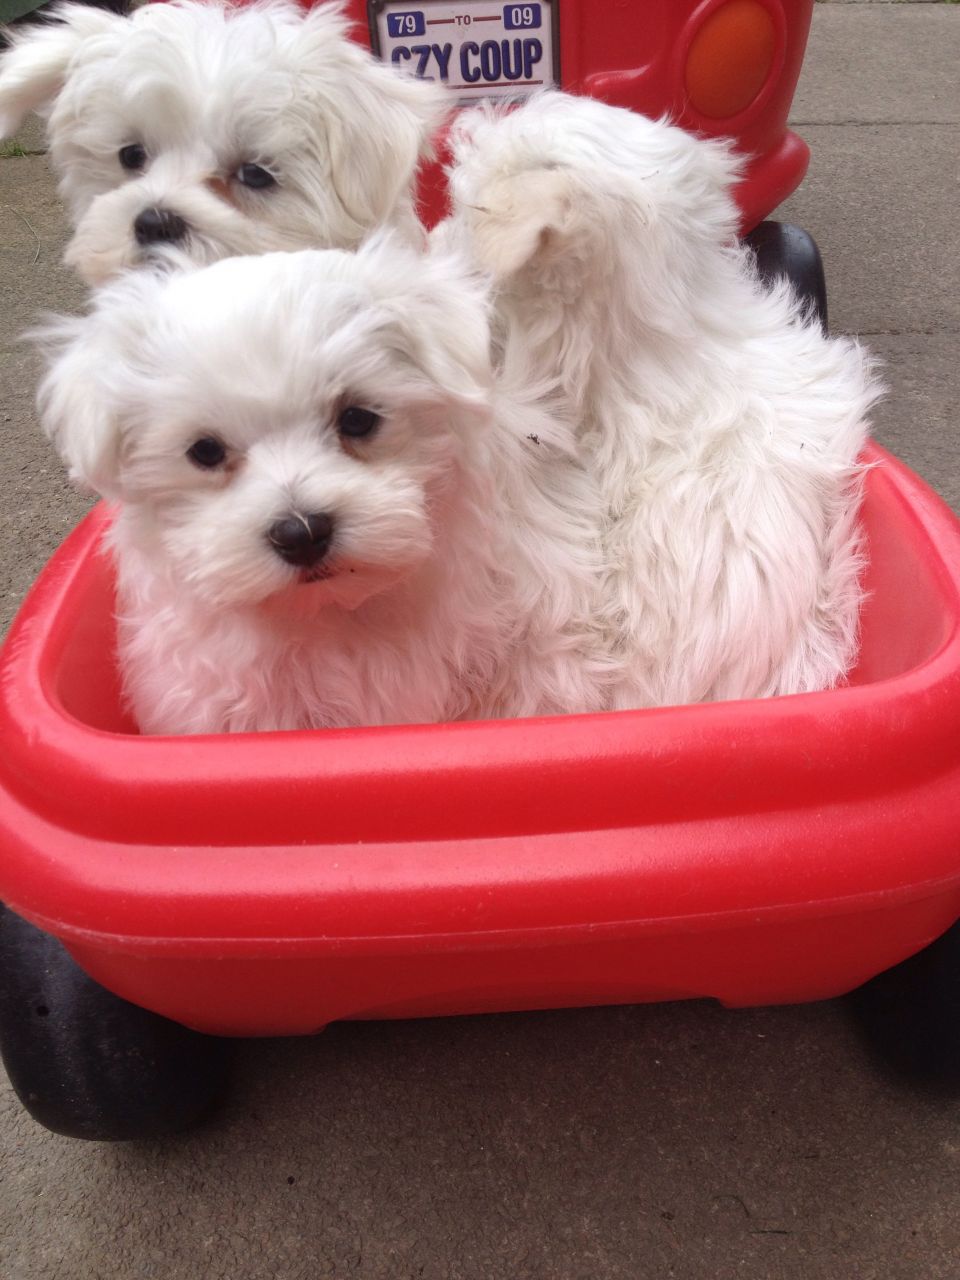 Gorgeous Maltese Puppies Available.